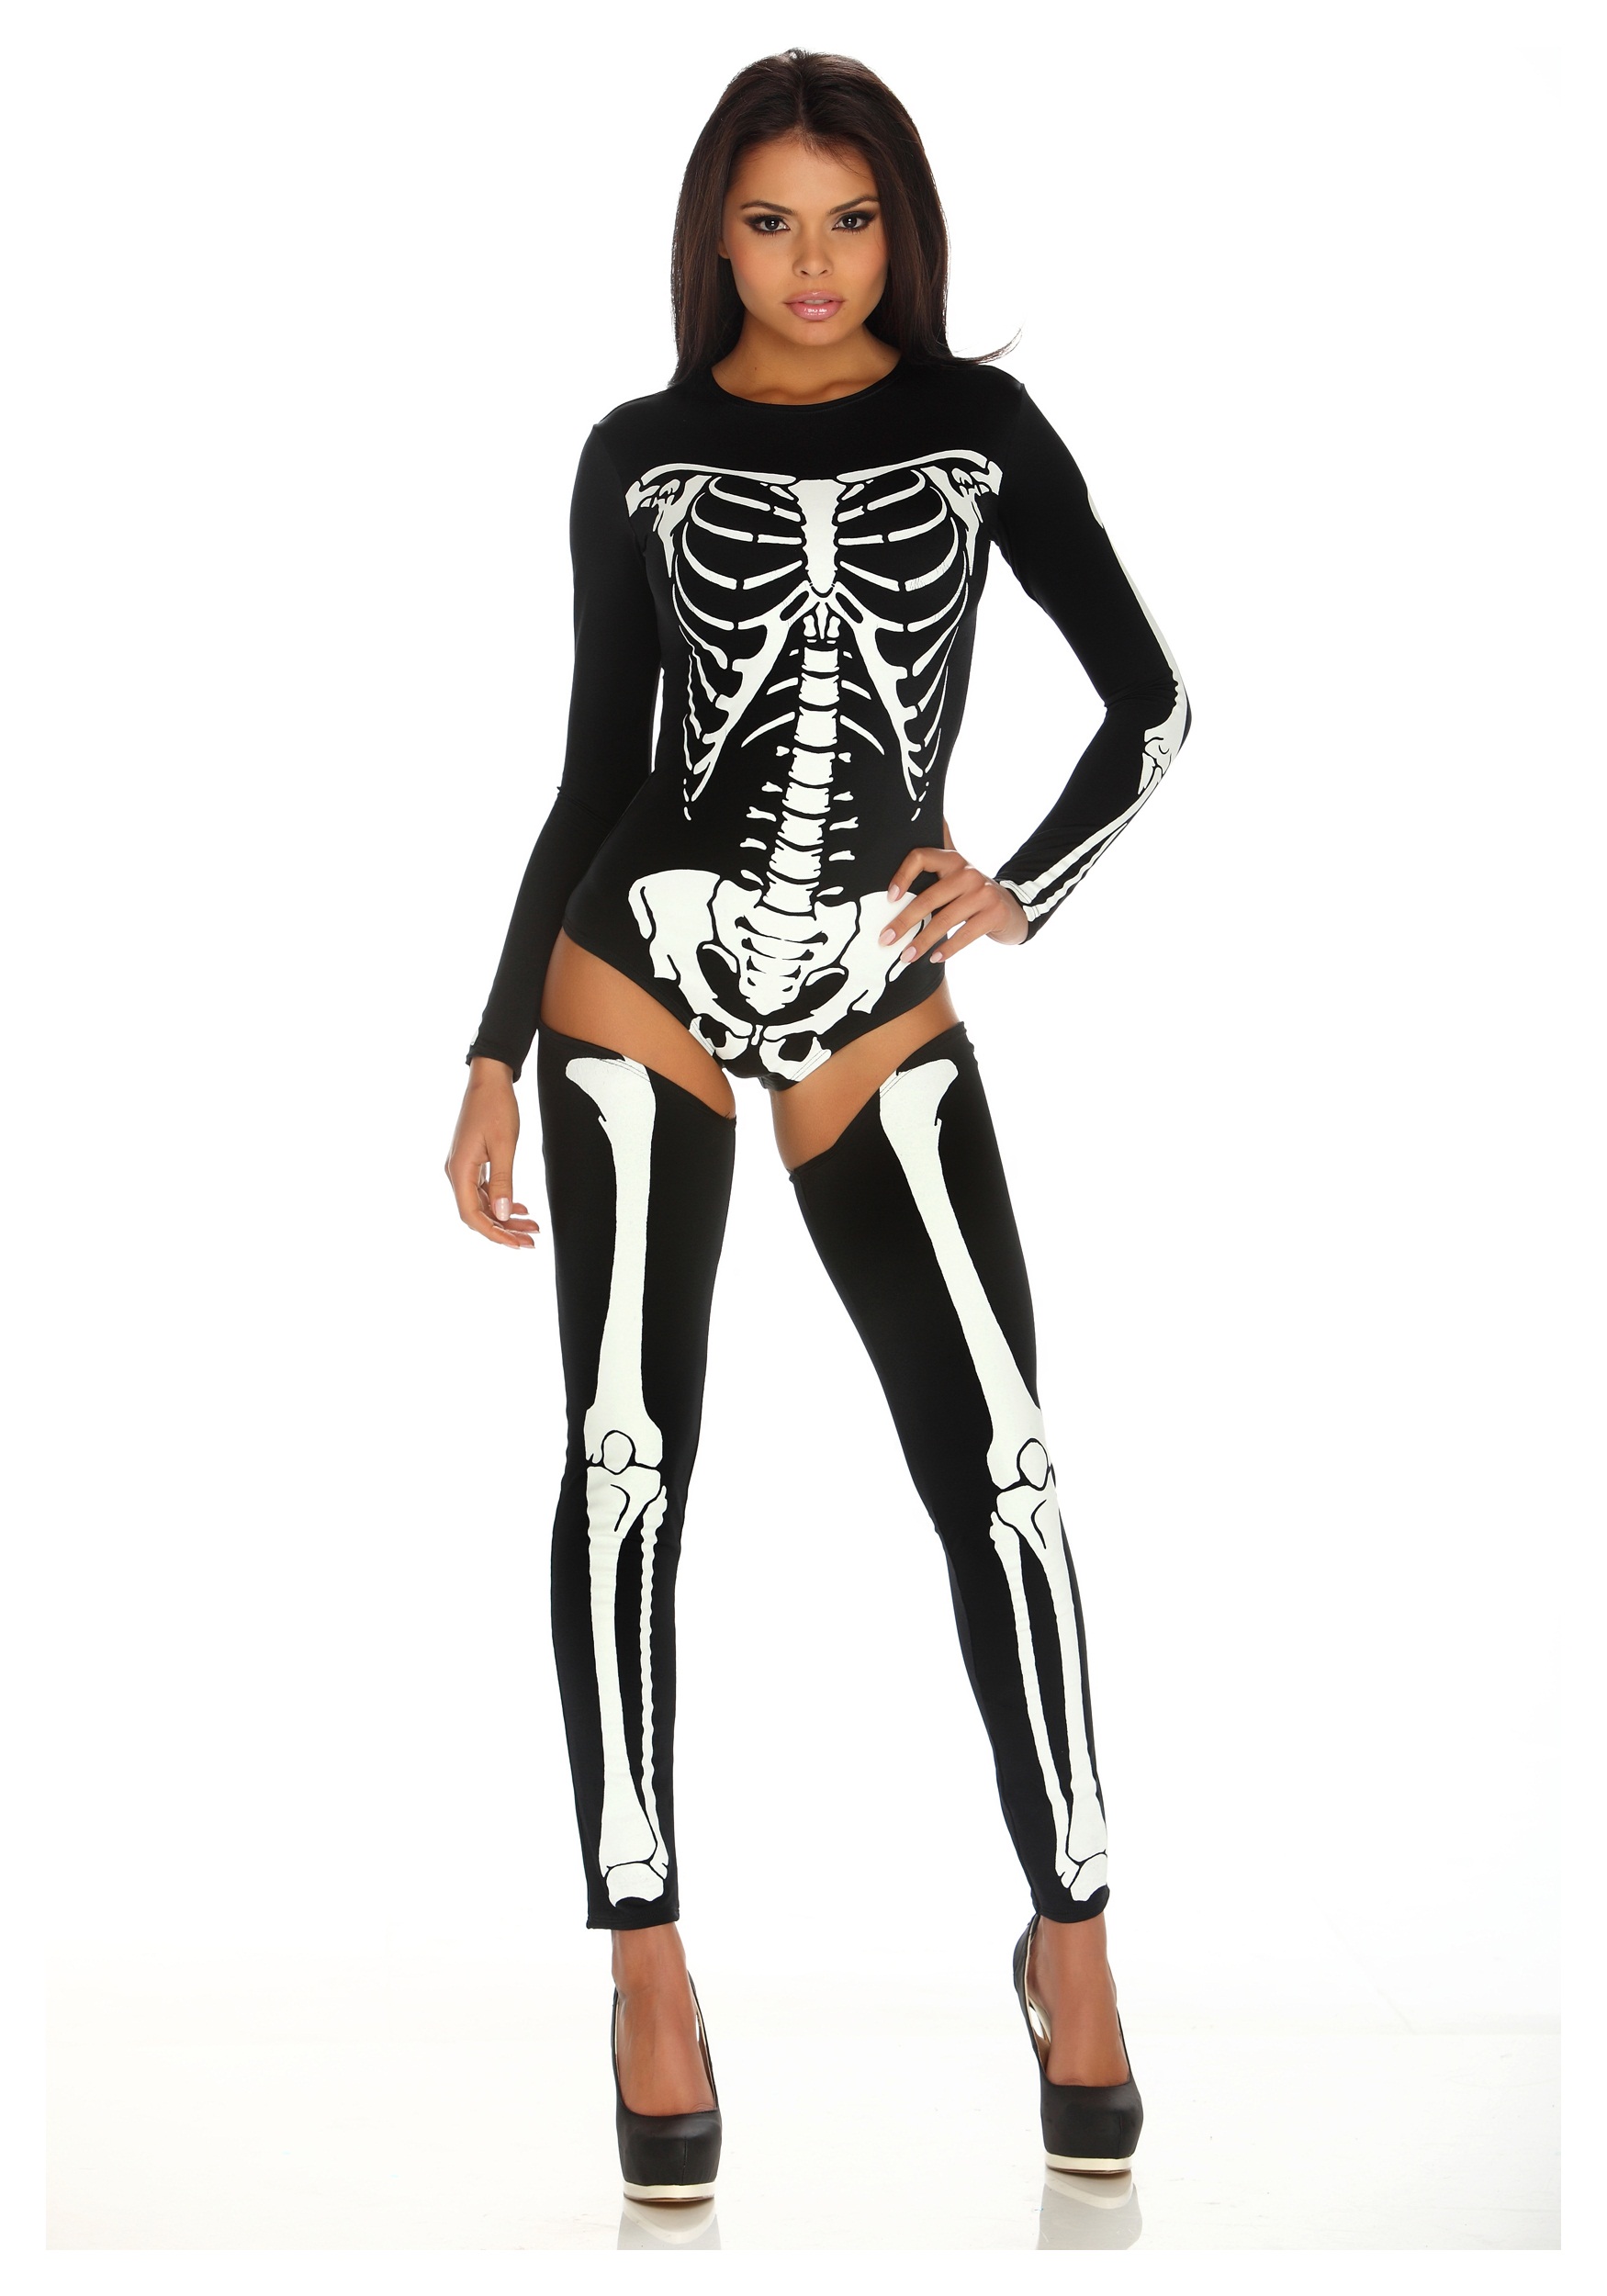 Image of Bad to the Bone Costume for Women ID FP553457-L/XL